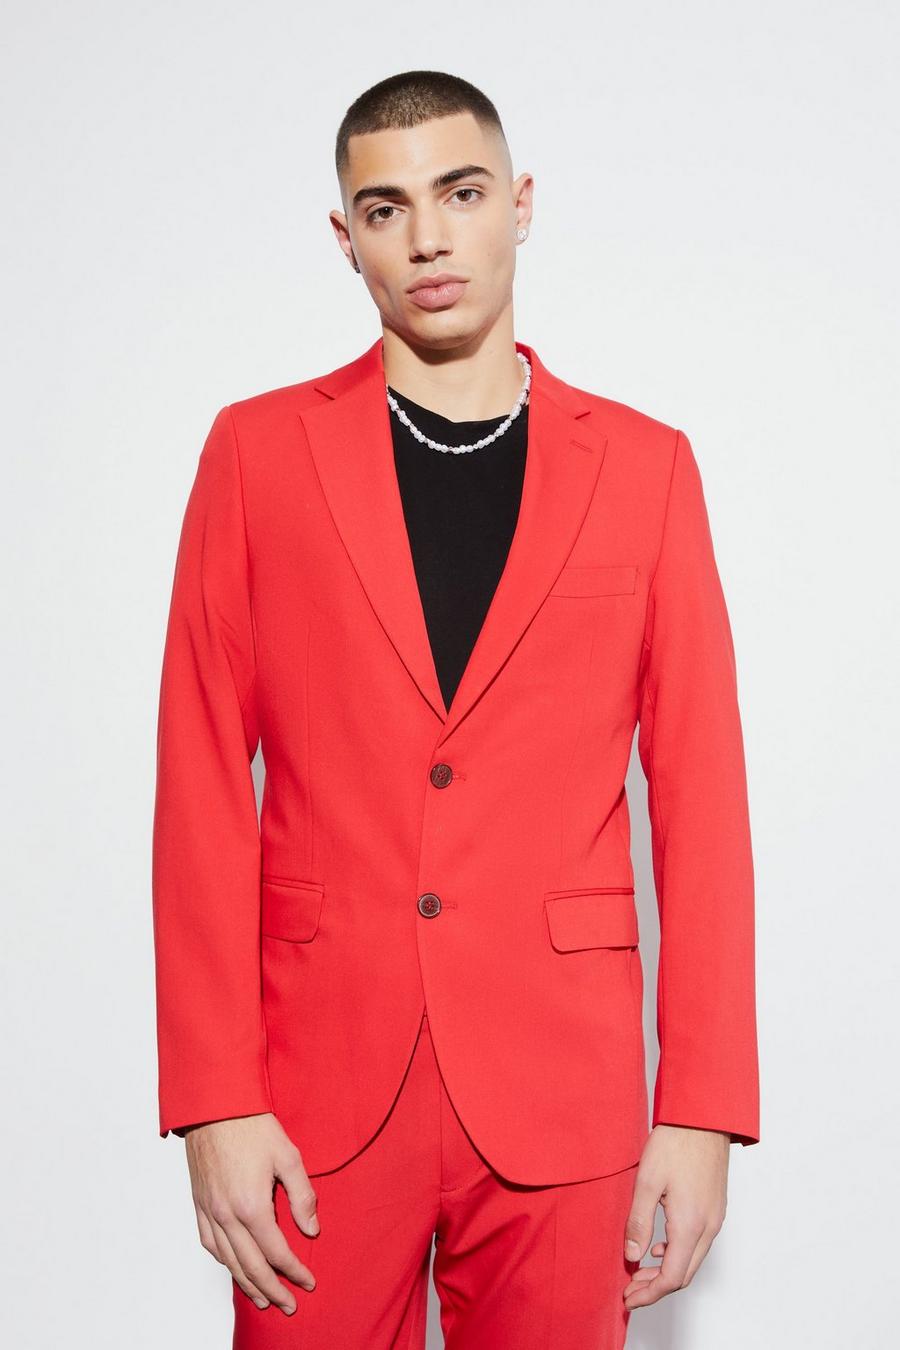 Red Skinny Fit Single Breasted Blazer